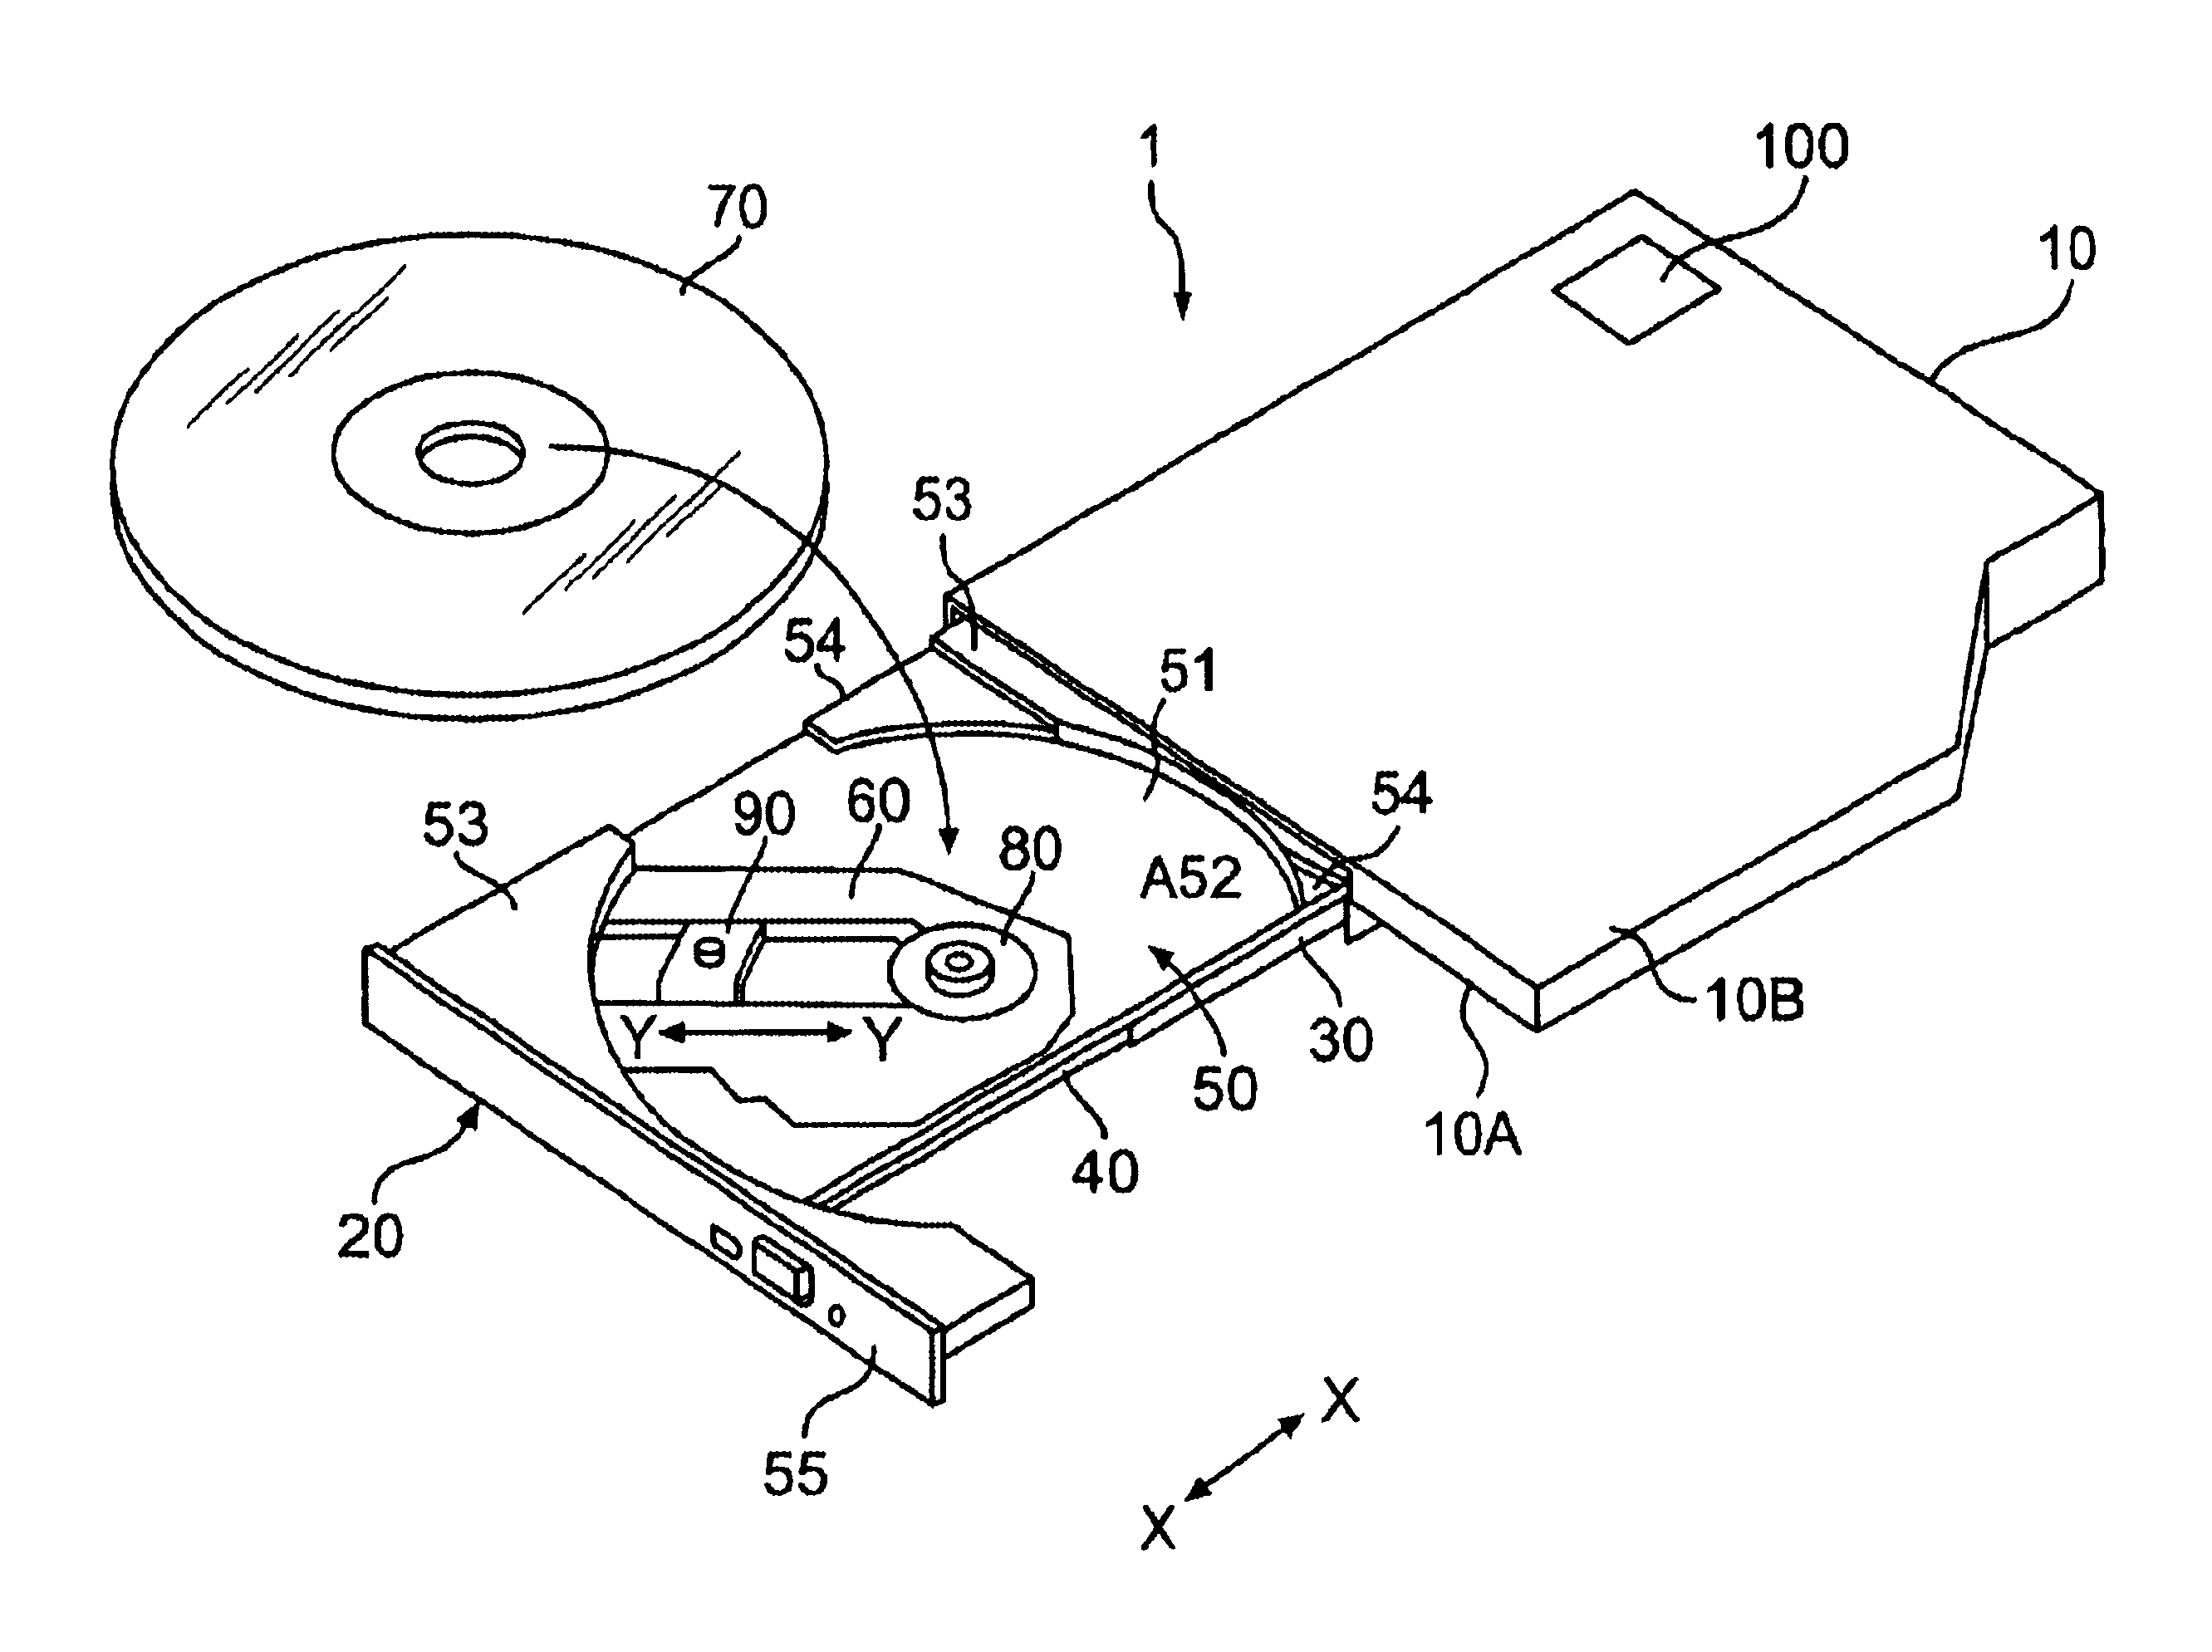 Disk apparatus for driving different kinds of optical disks and a method for identifying performance characteristics for a particular optical disk installed in the disk apparatus